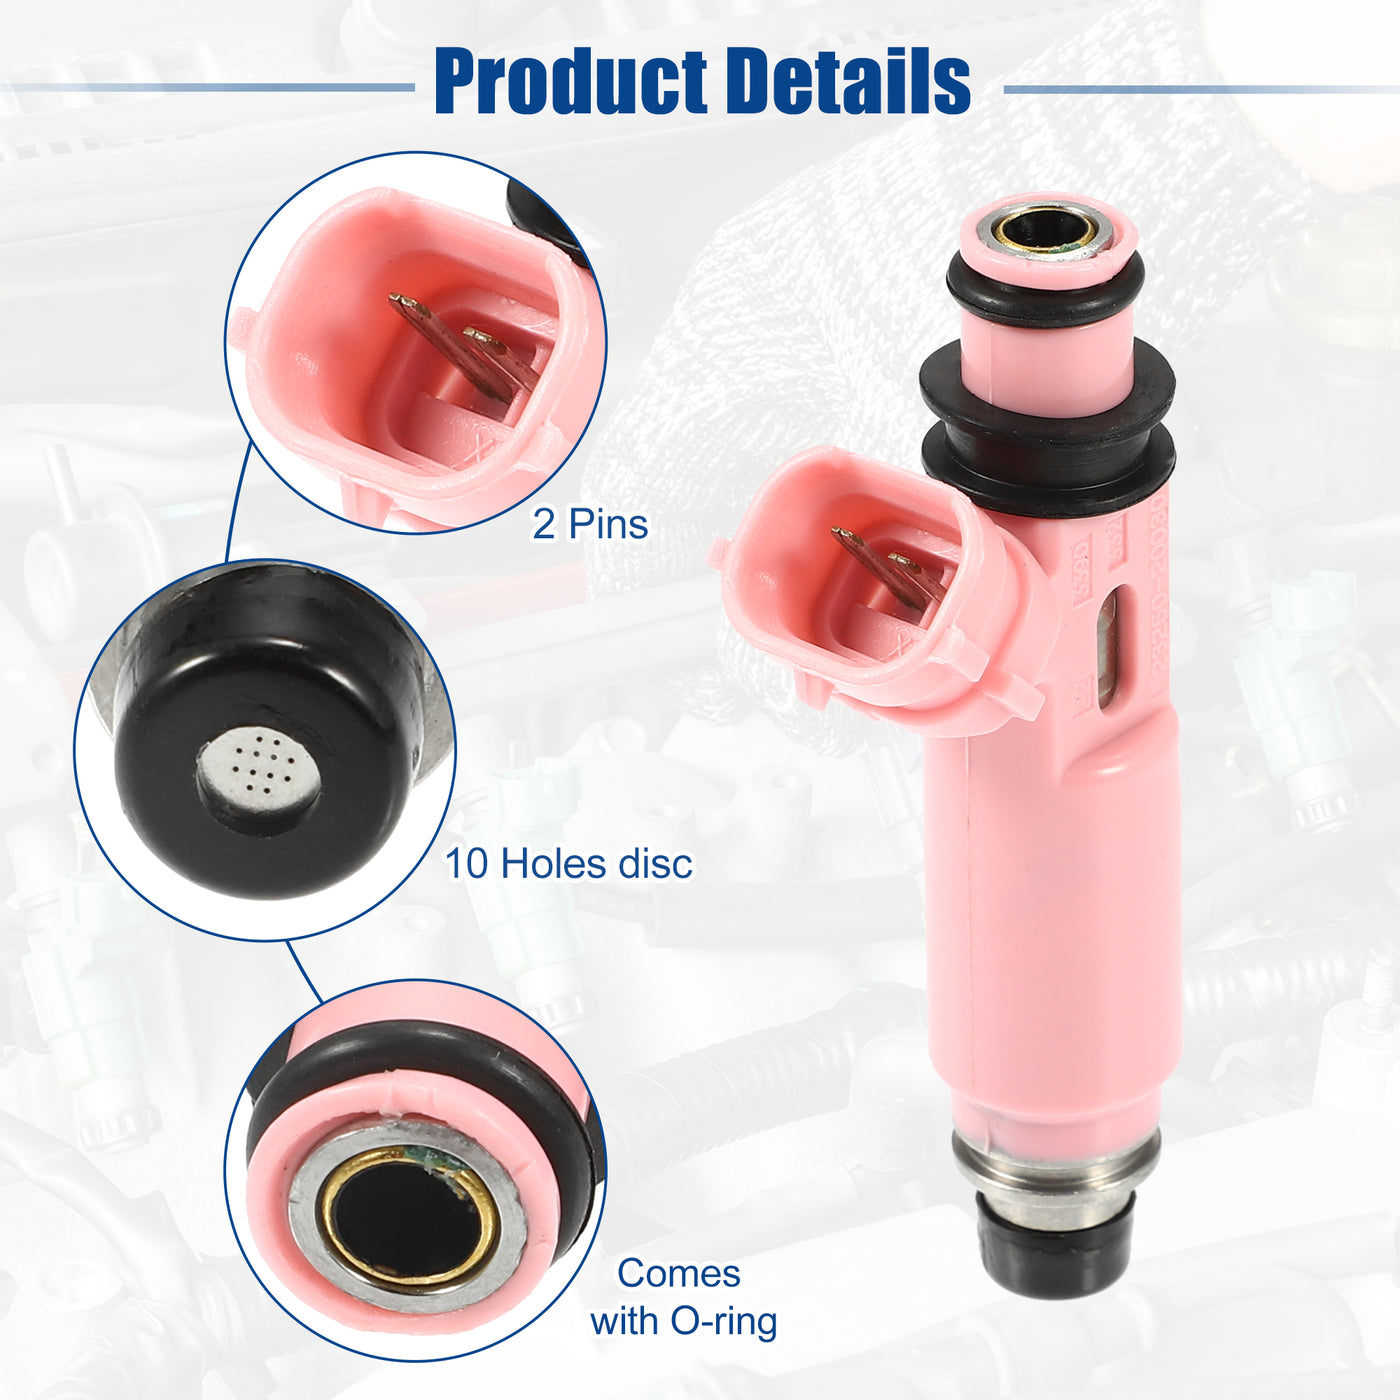 ACROPIX Car Fuel Injector Nozzle Replace for Toyota Camry 3.0L 3.3L 2001-2006 23250-0A020 - Pack of 1 Pink